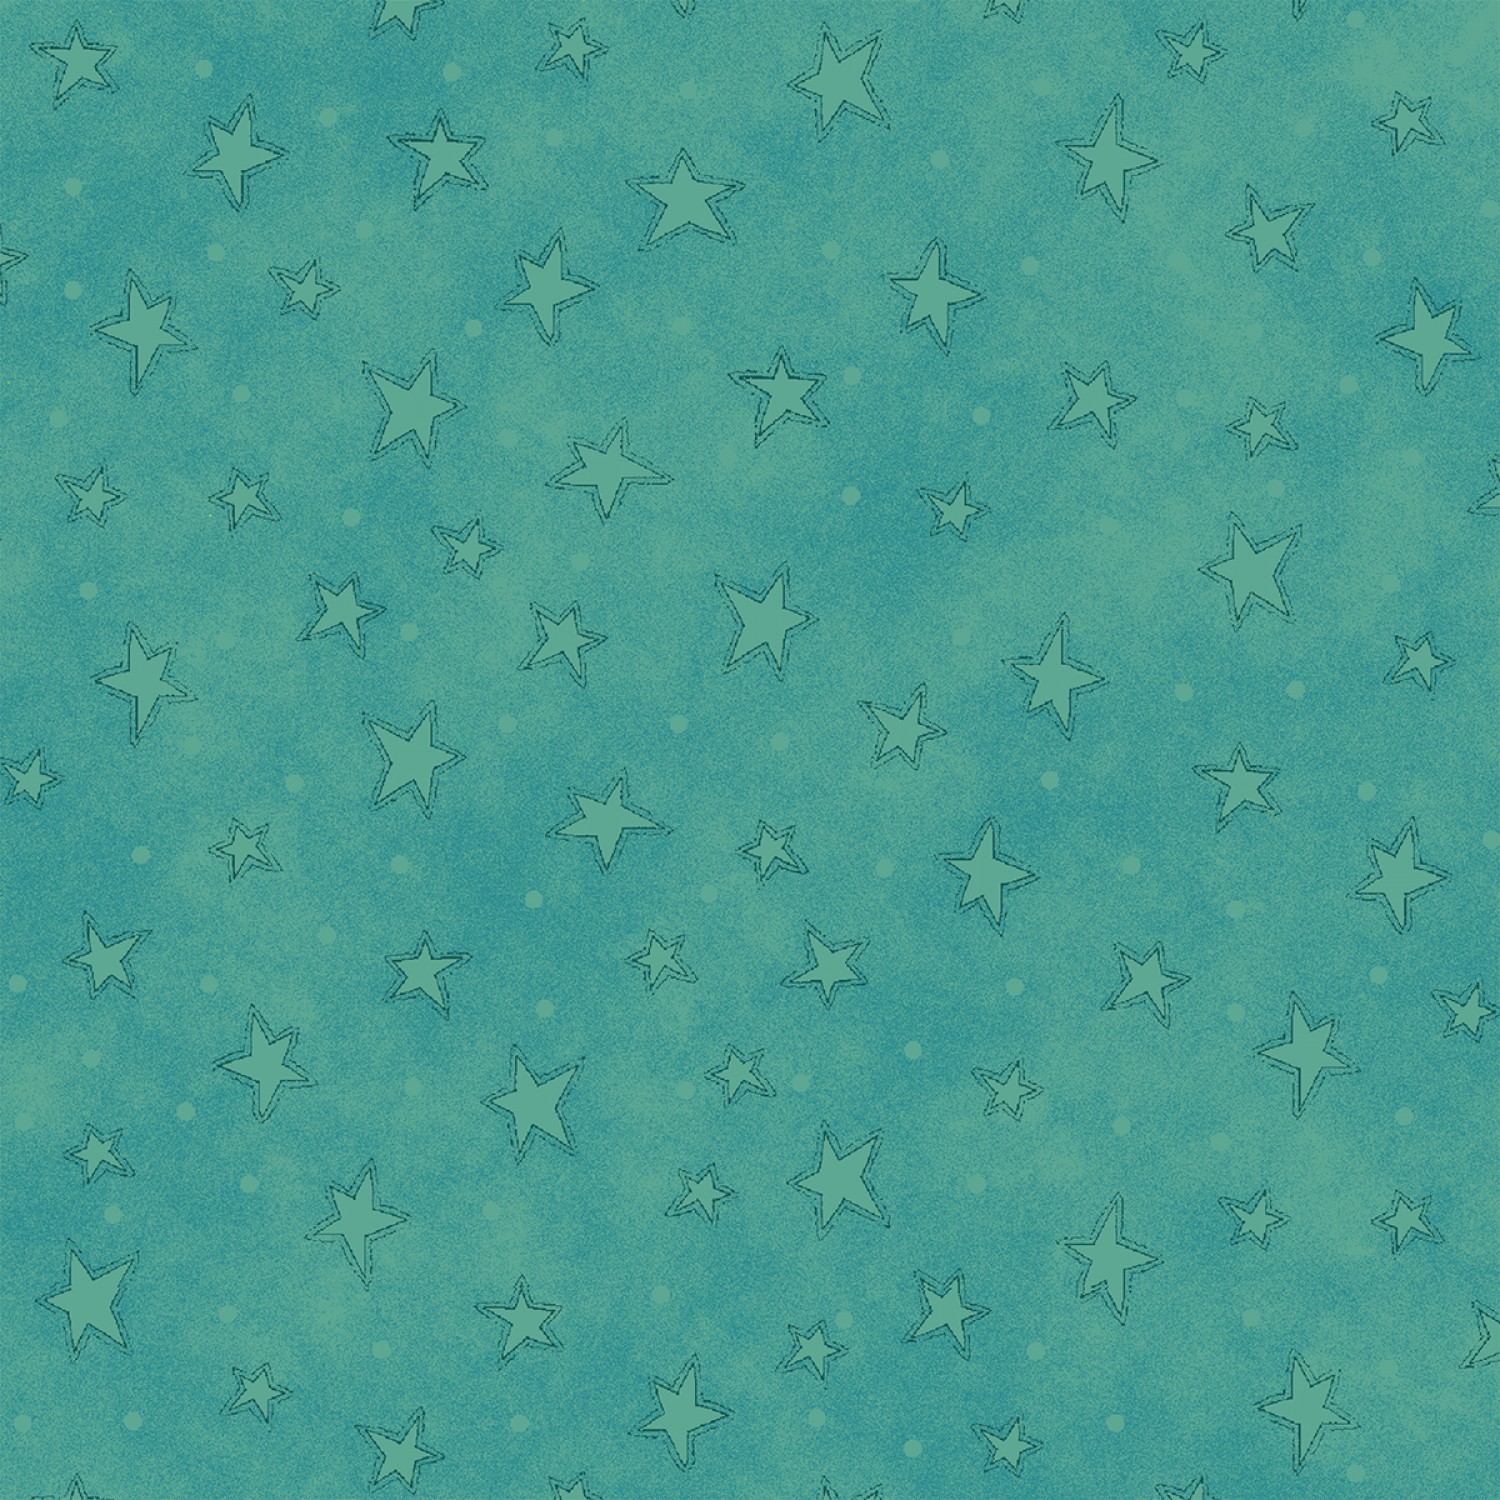 Teal Starry Fabric